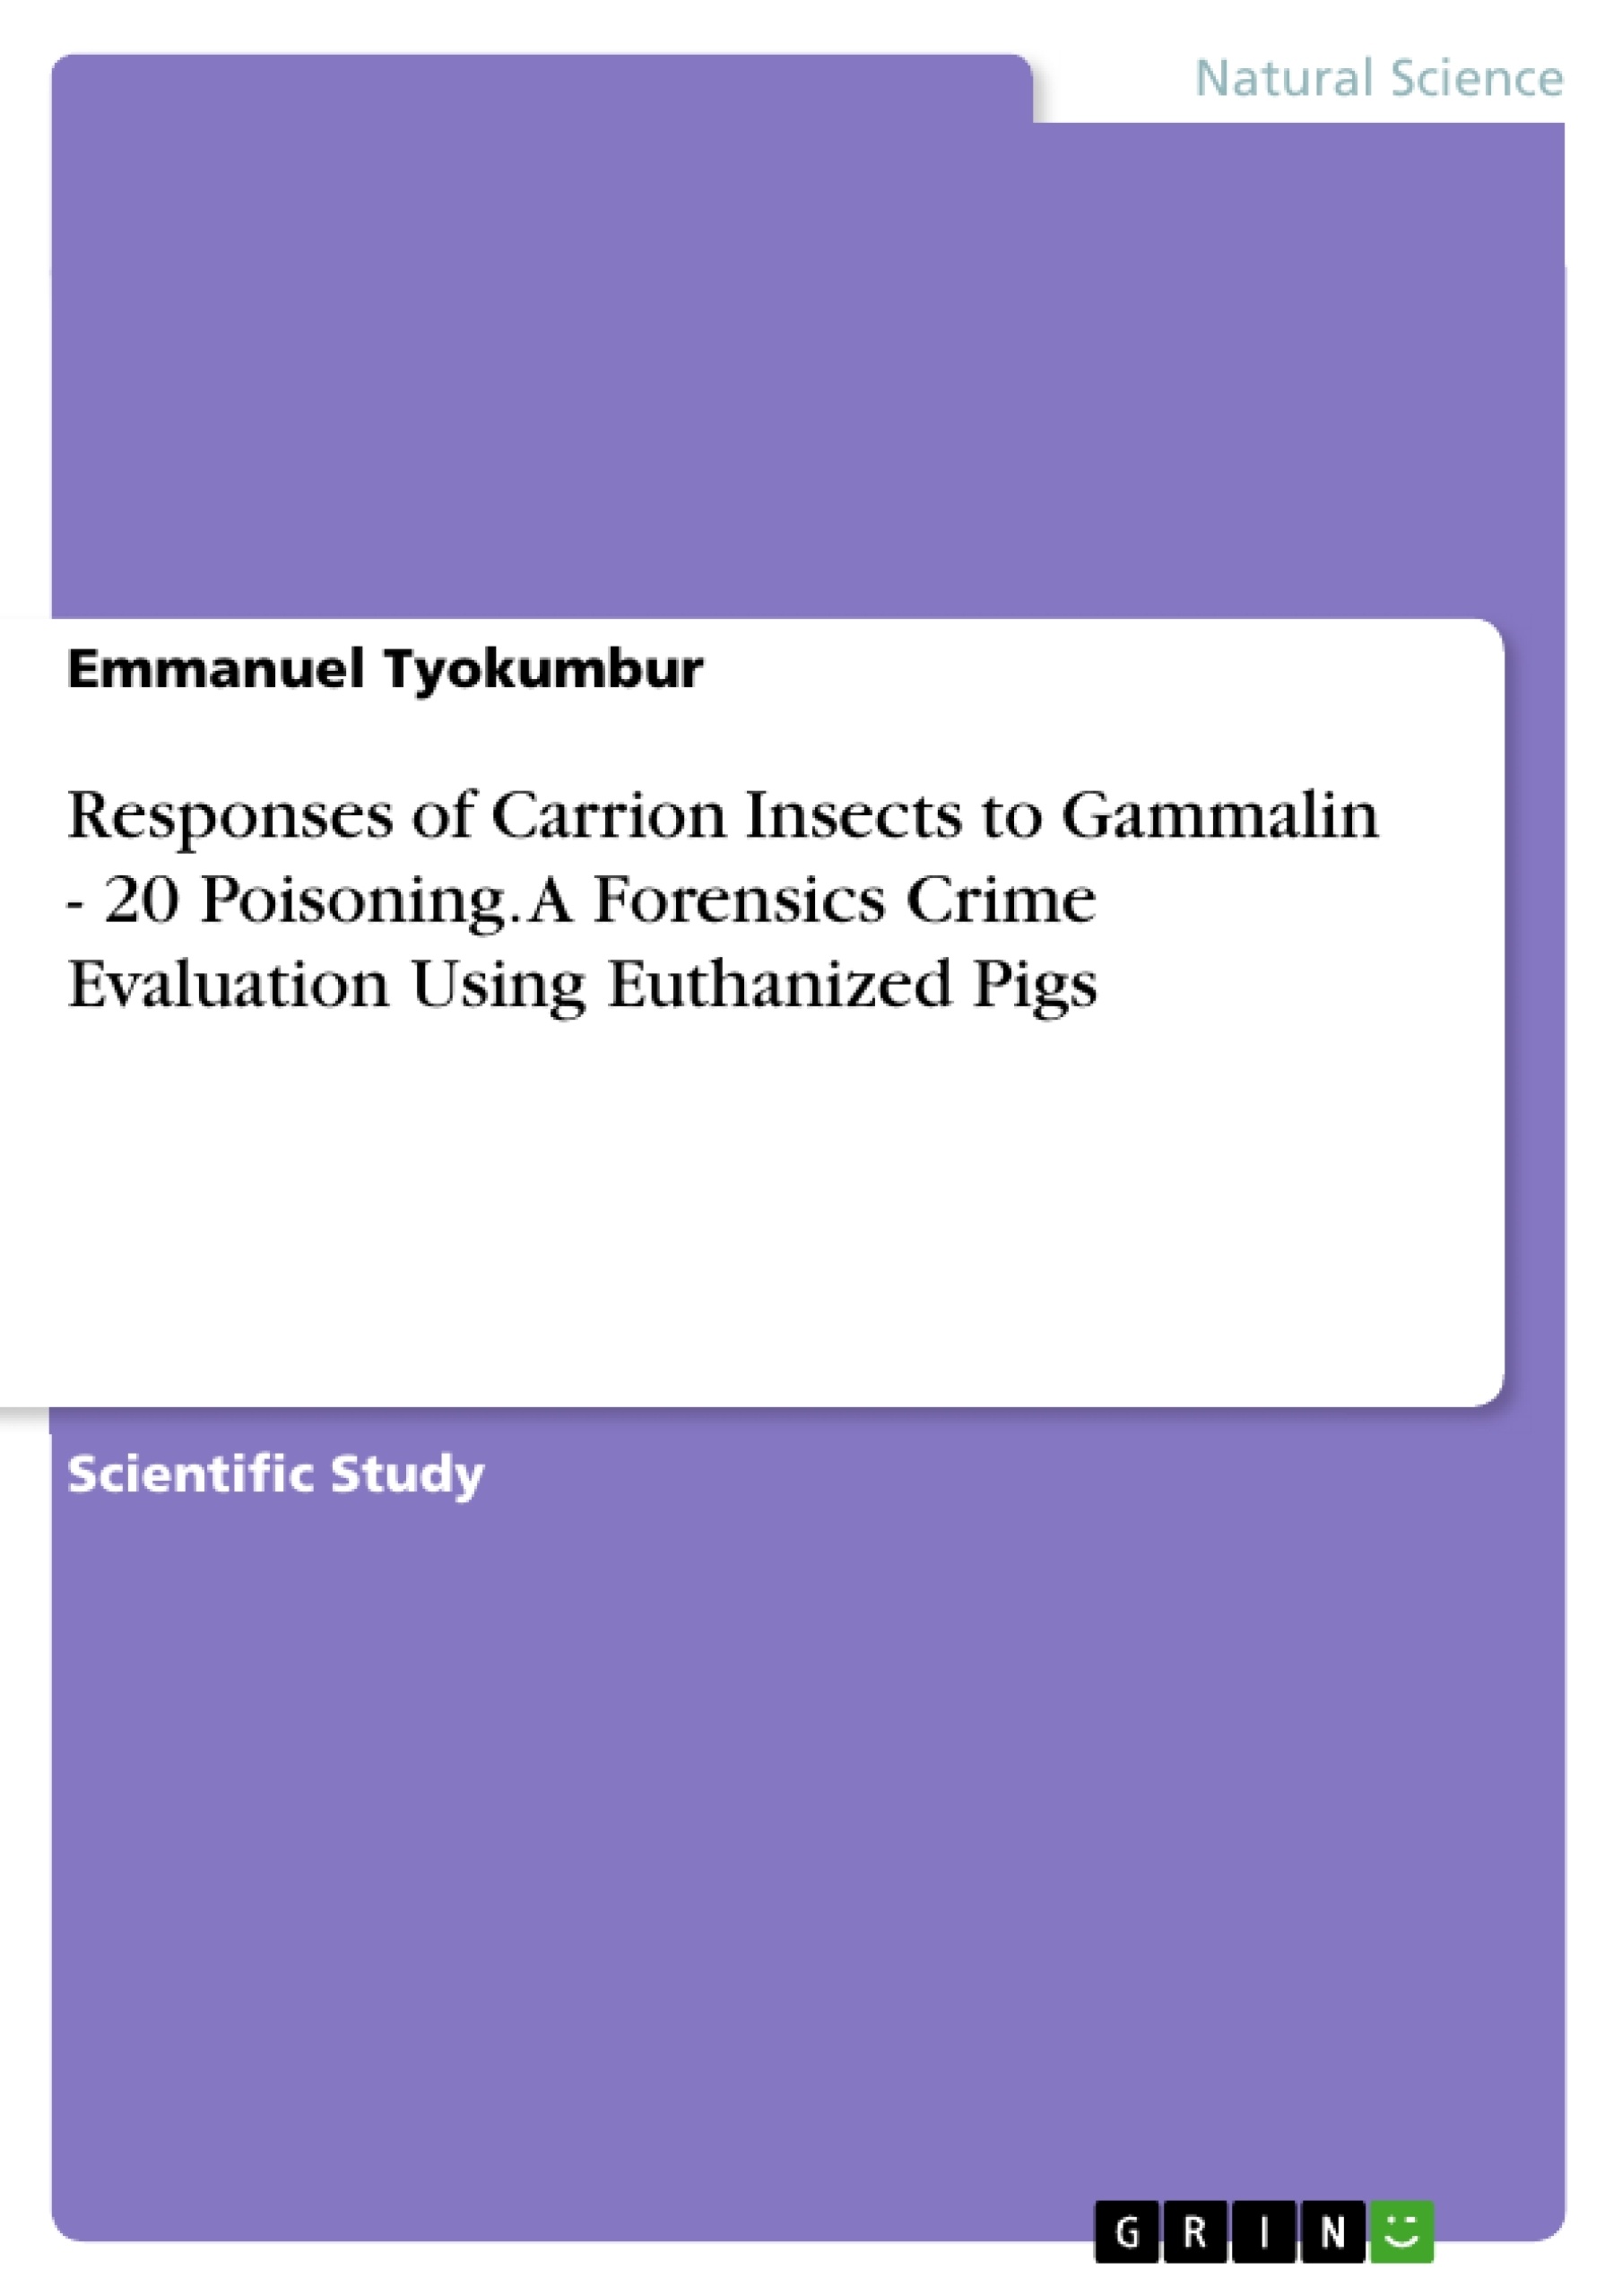 Title: Responses of Carrion Insects to Gammalin - 20 Poisoning. A Forensics Crime Evaluation Using Euthanized Pigs